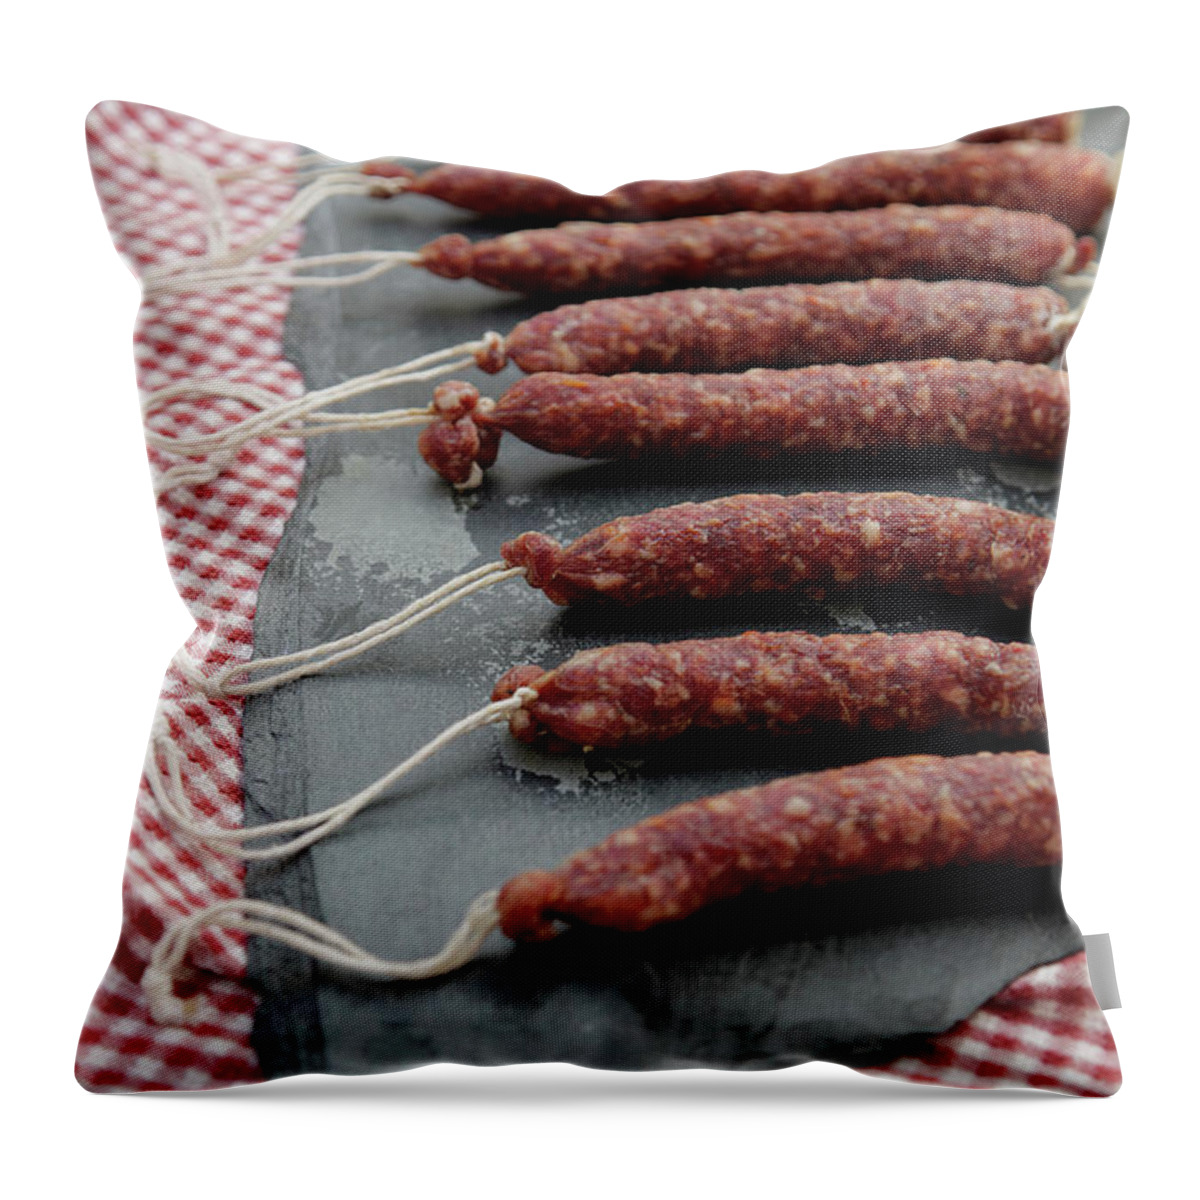 San Francisco Throw Pillow featuring the photograph Homemade Italian Sausage Tied With by Elisa Cicinelli